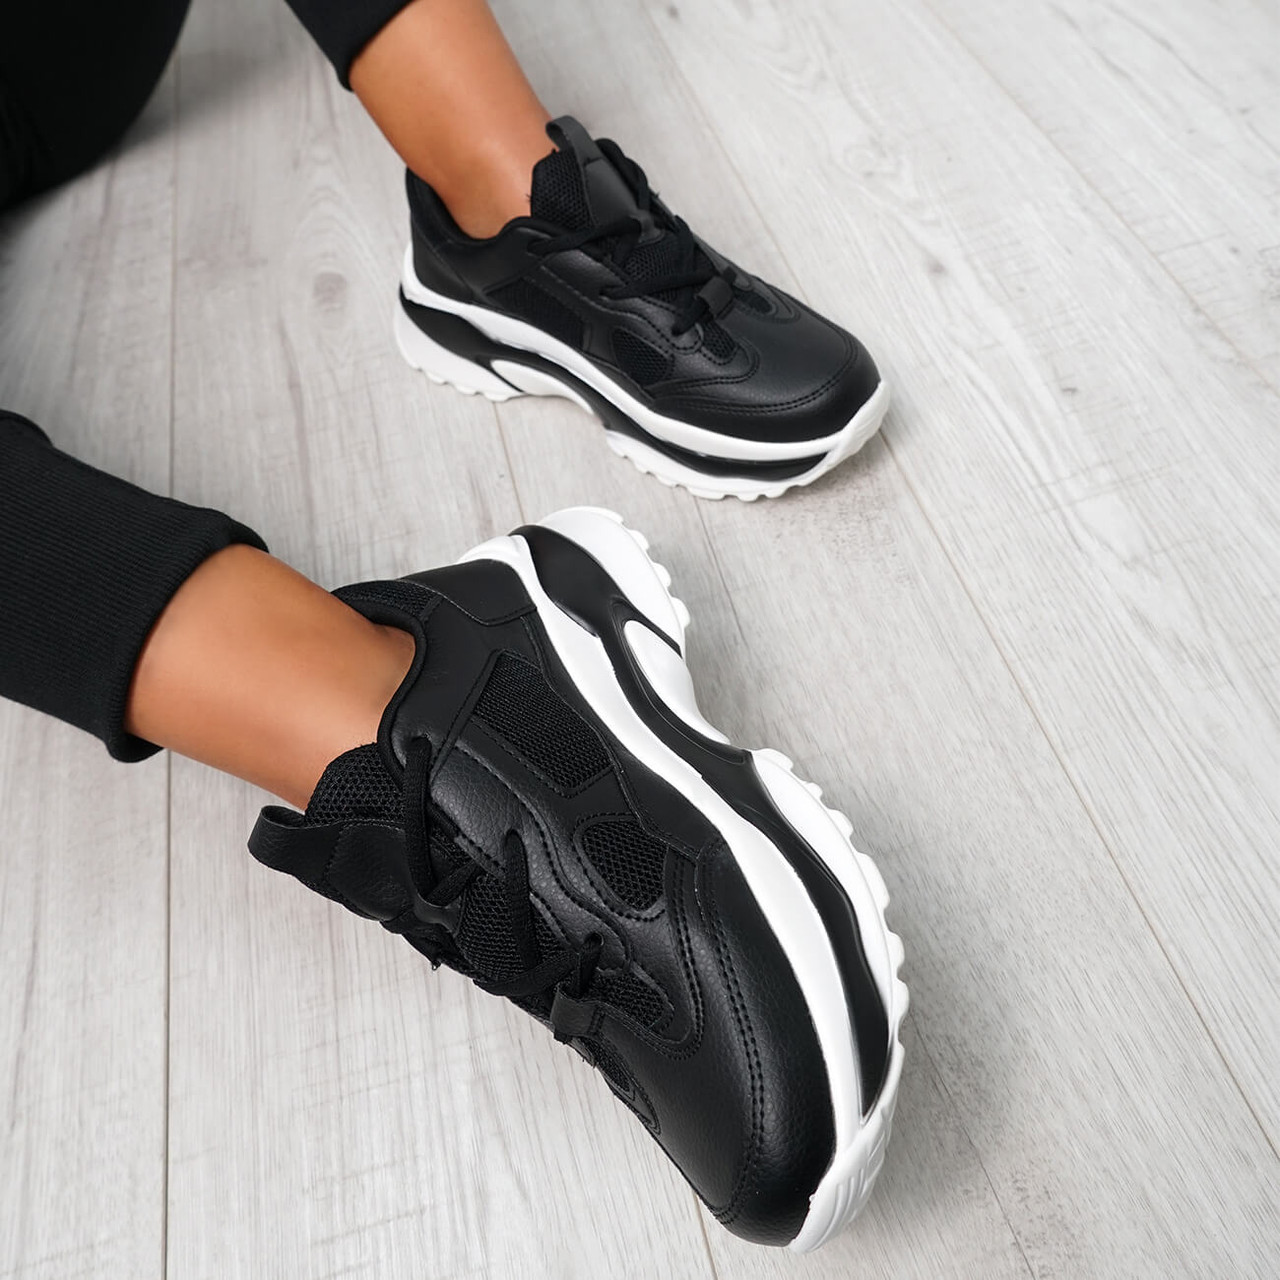 Patta Black Chunky Trainers - Fast Delivery